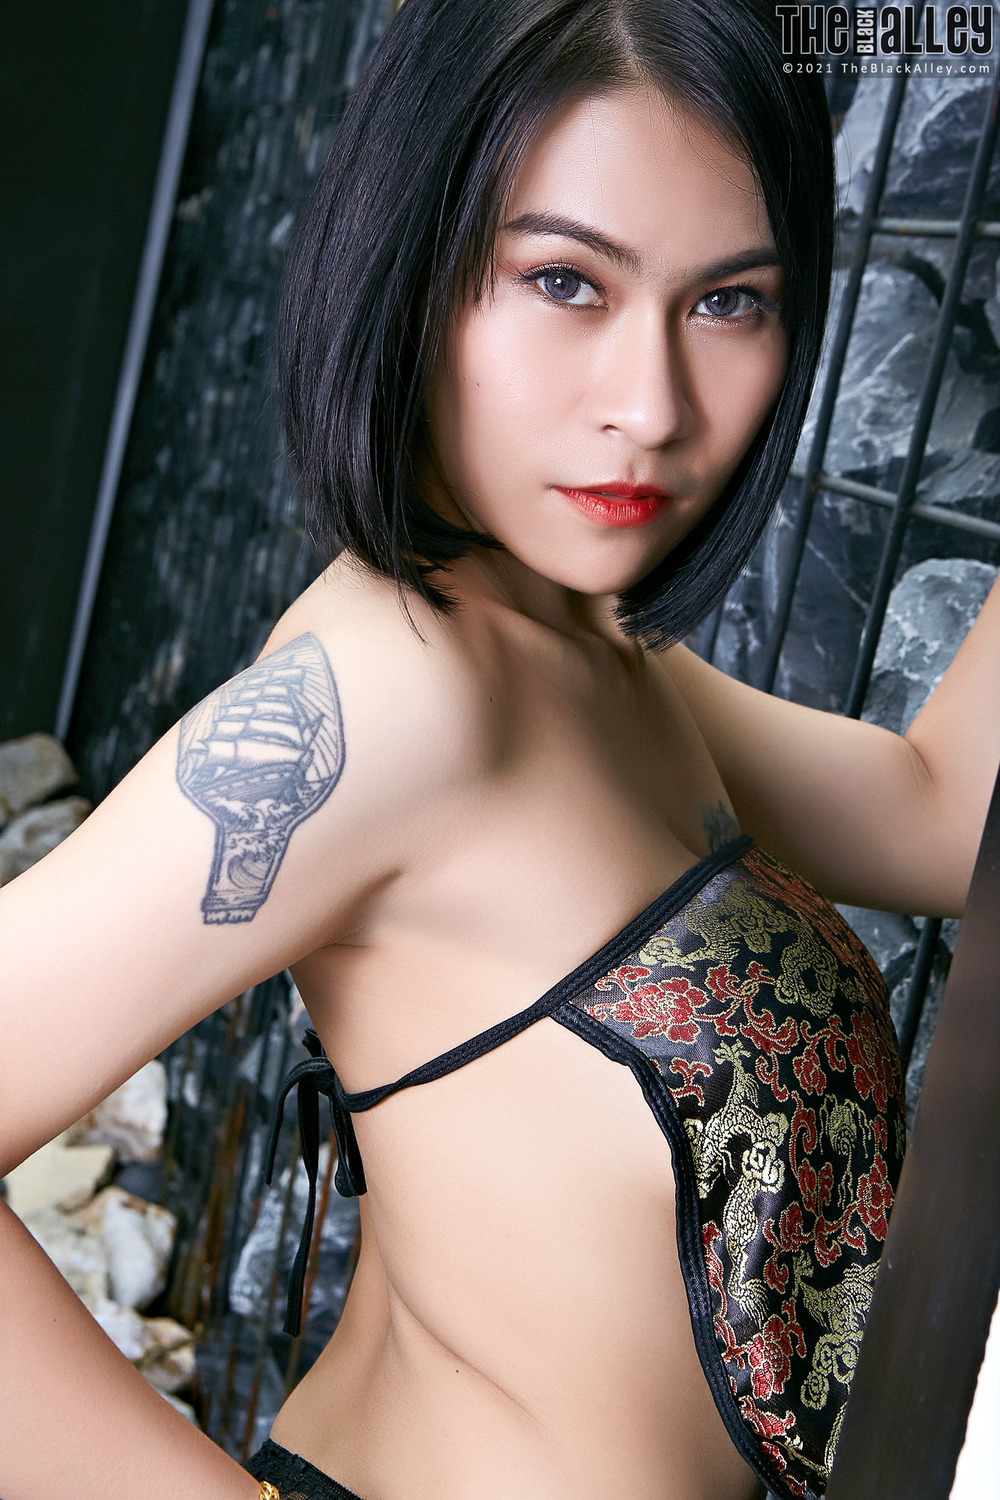 [The Black Alley] Mintra Photo Set.03 (2021.07.22)